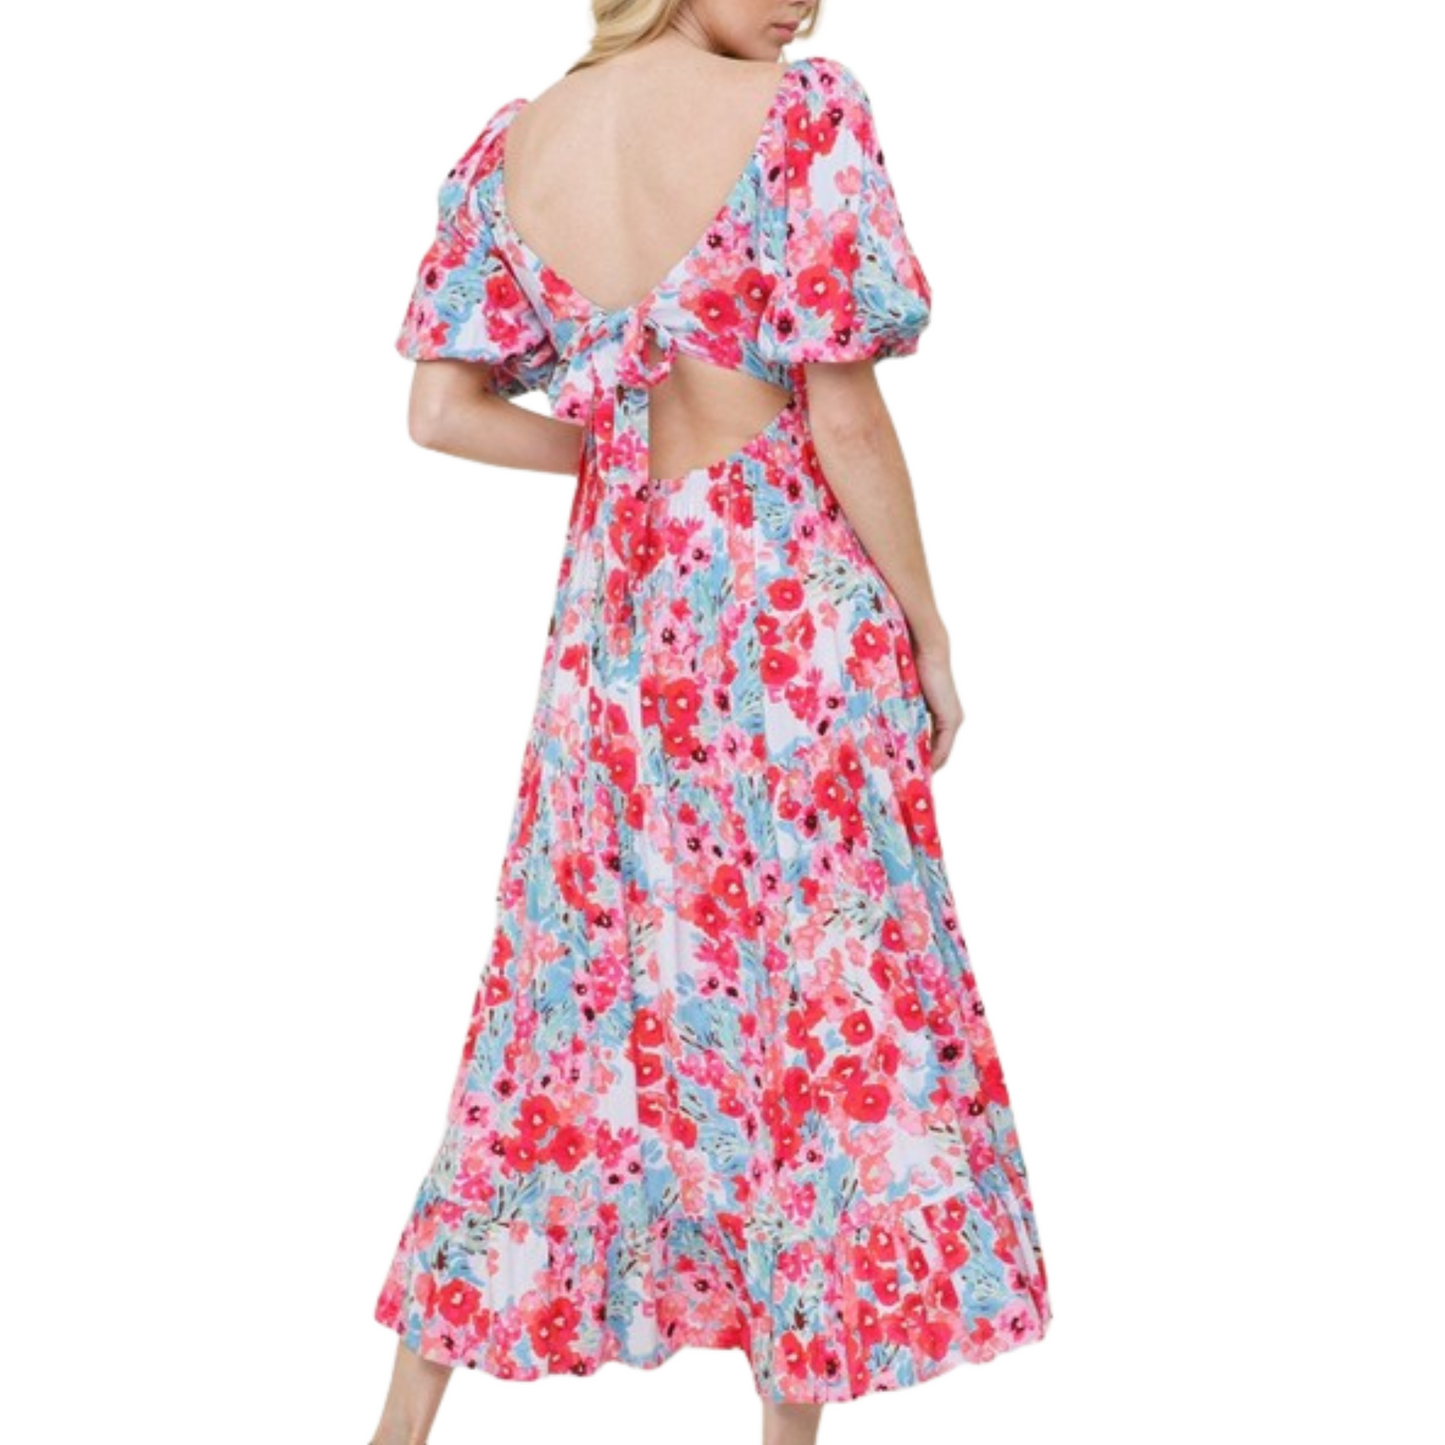 Pink, blue and white floral midi dress with square neckline and tie back, worn by a woman from the back.